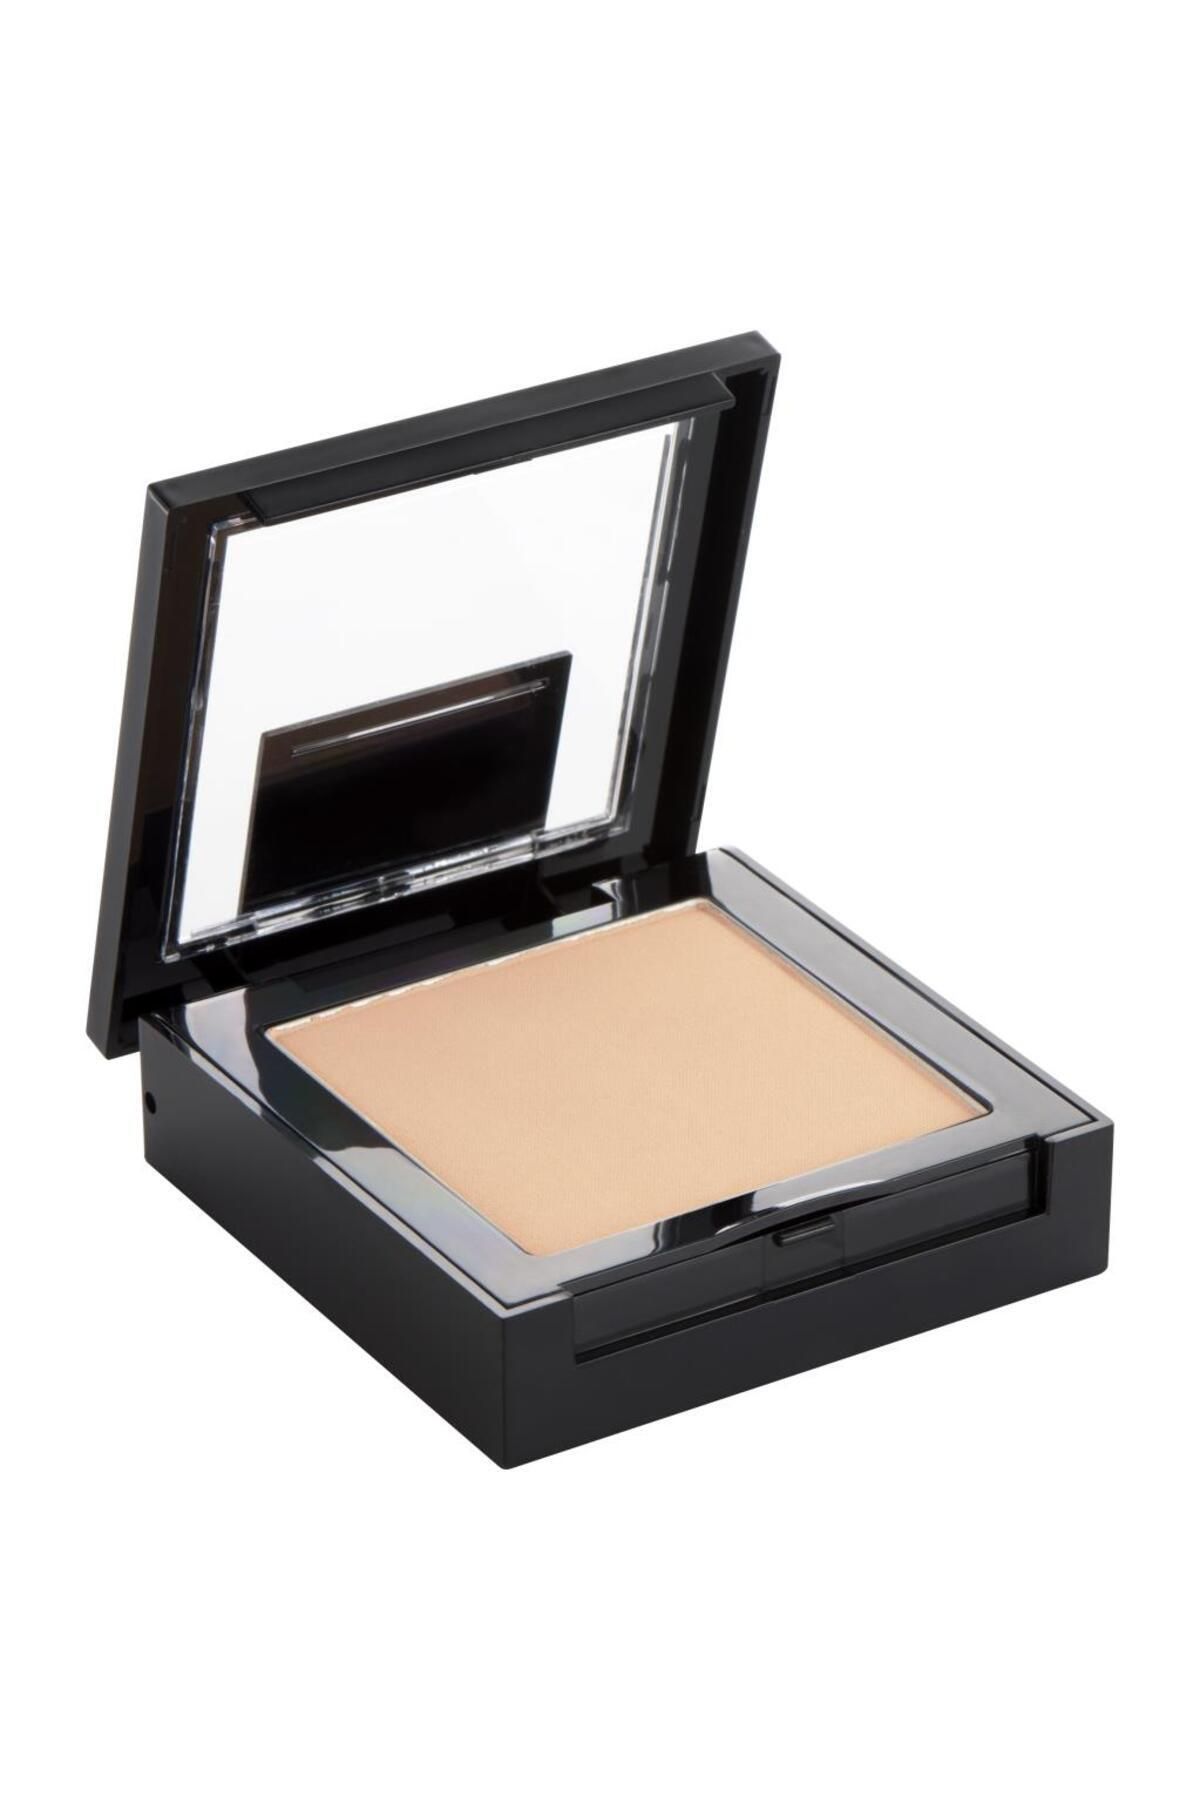 Maybelline New York FİT ME MATTE PORELESS POWDER THAT FİLLS THE LİNES - 120 CLASSİC IVORY GKHAİR1117